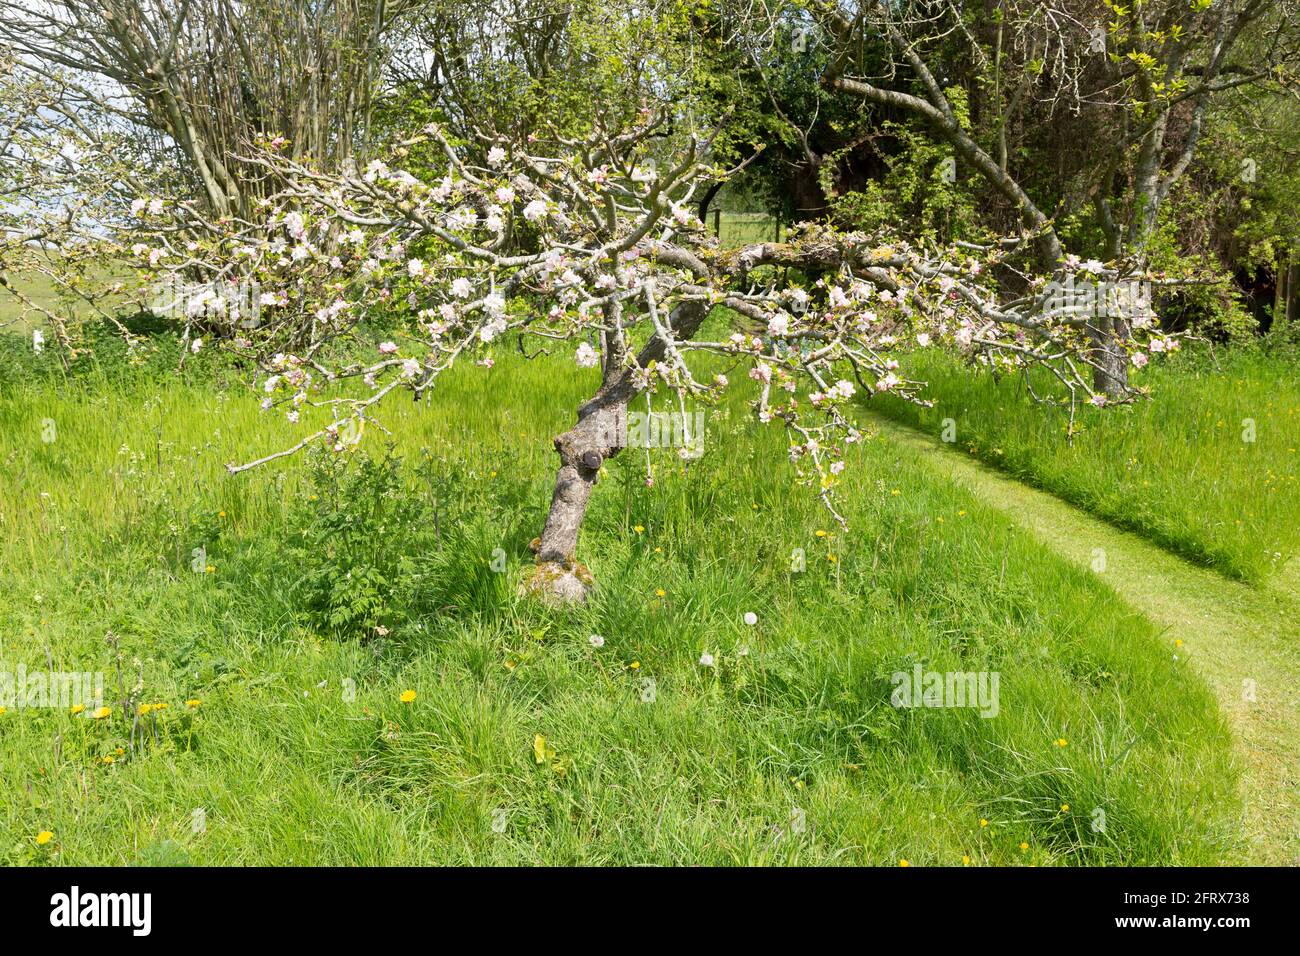 Blossom on small apple tree in private garden, Wiltshire, England, UK Stock Photo